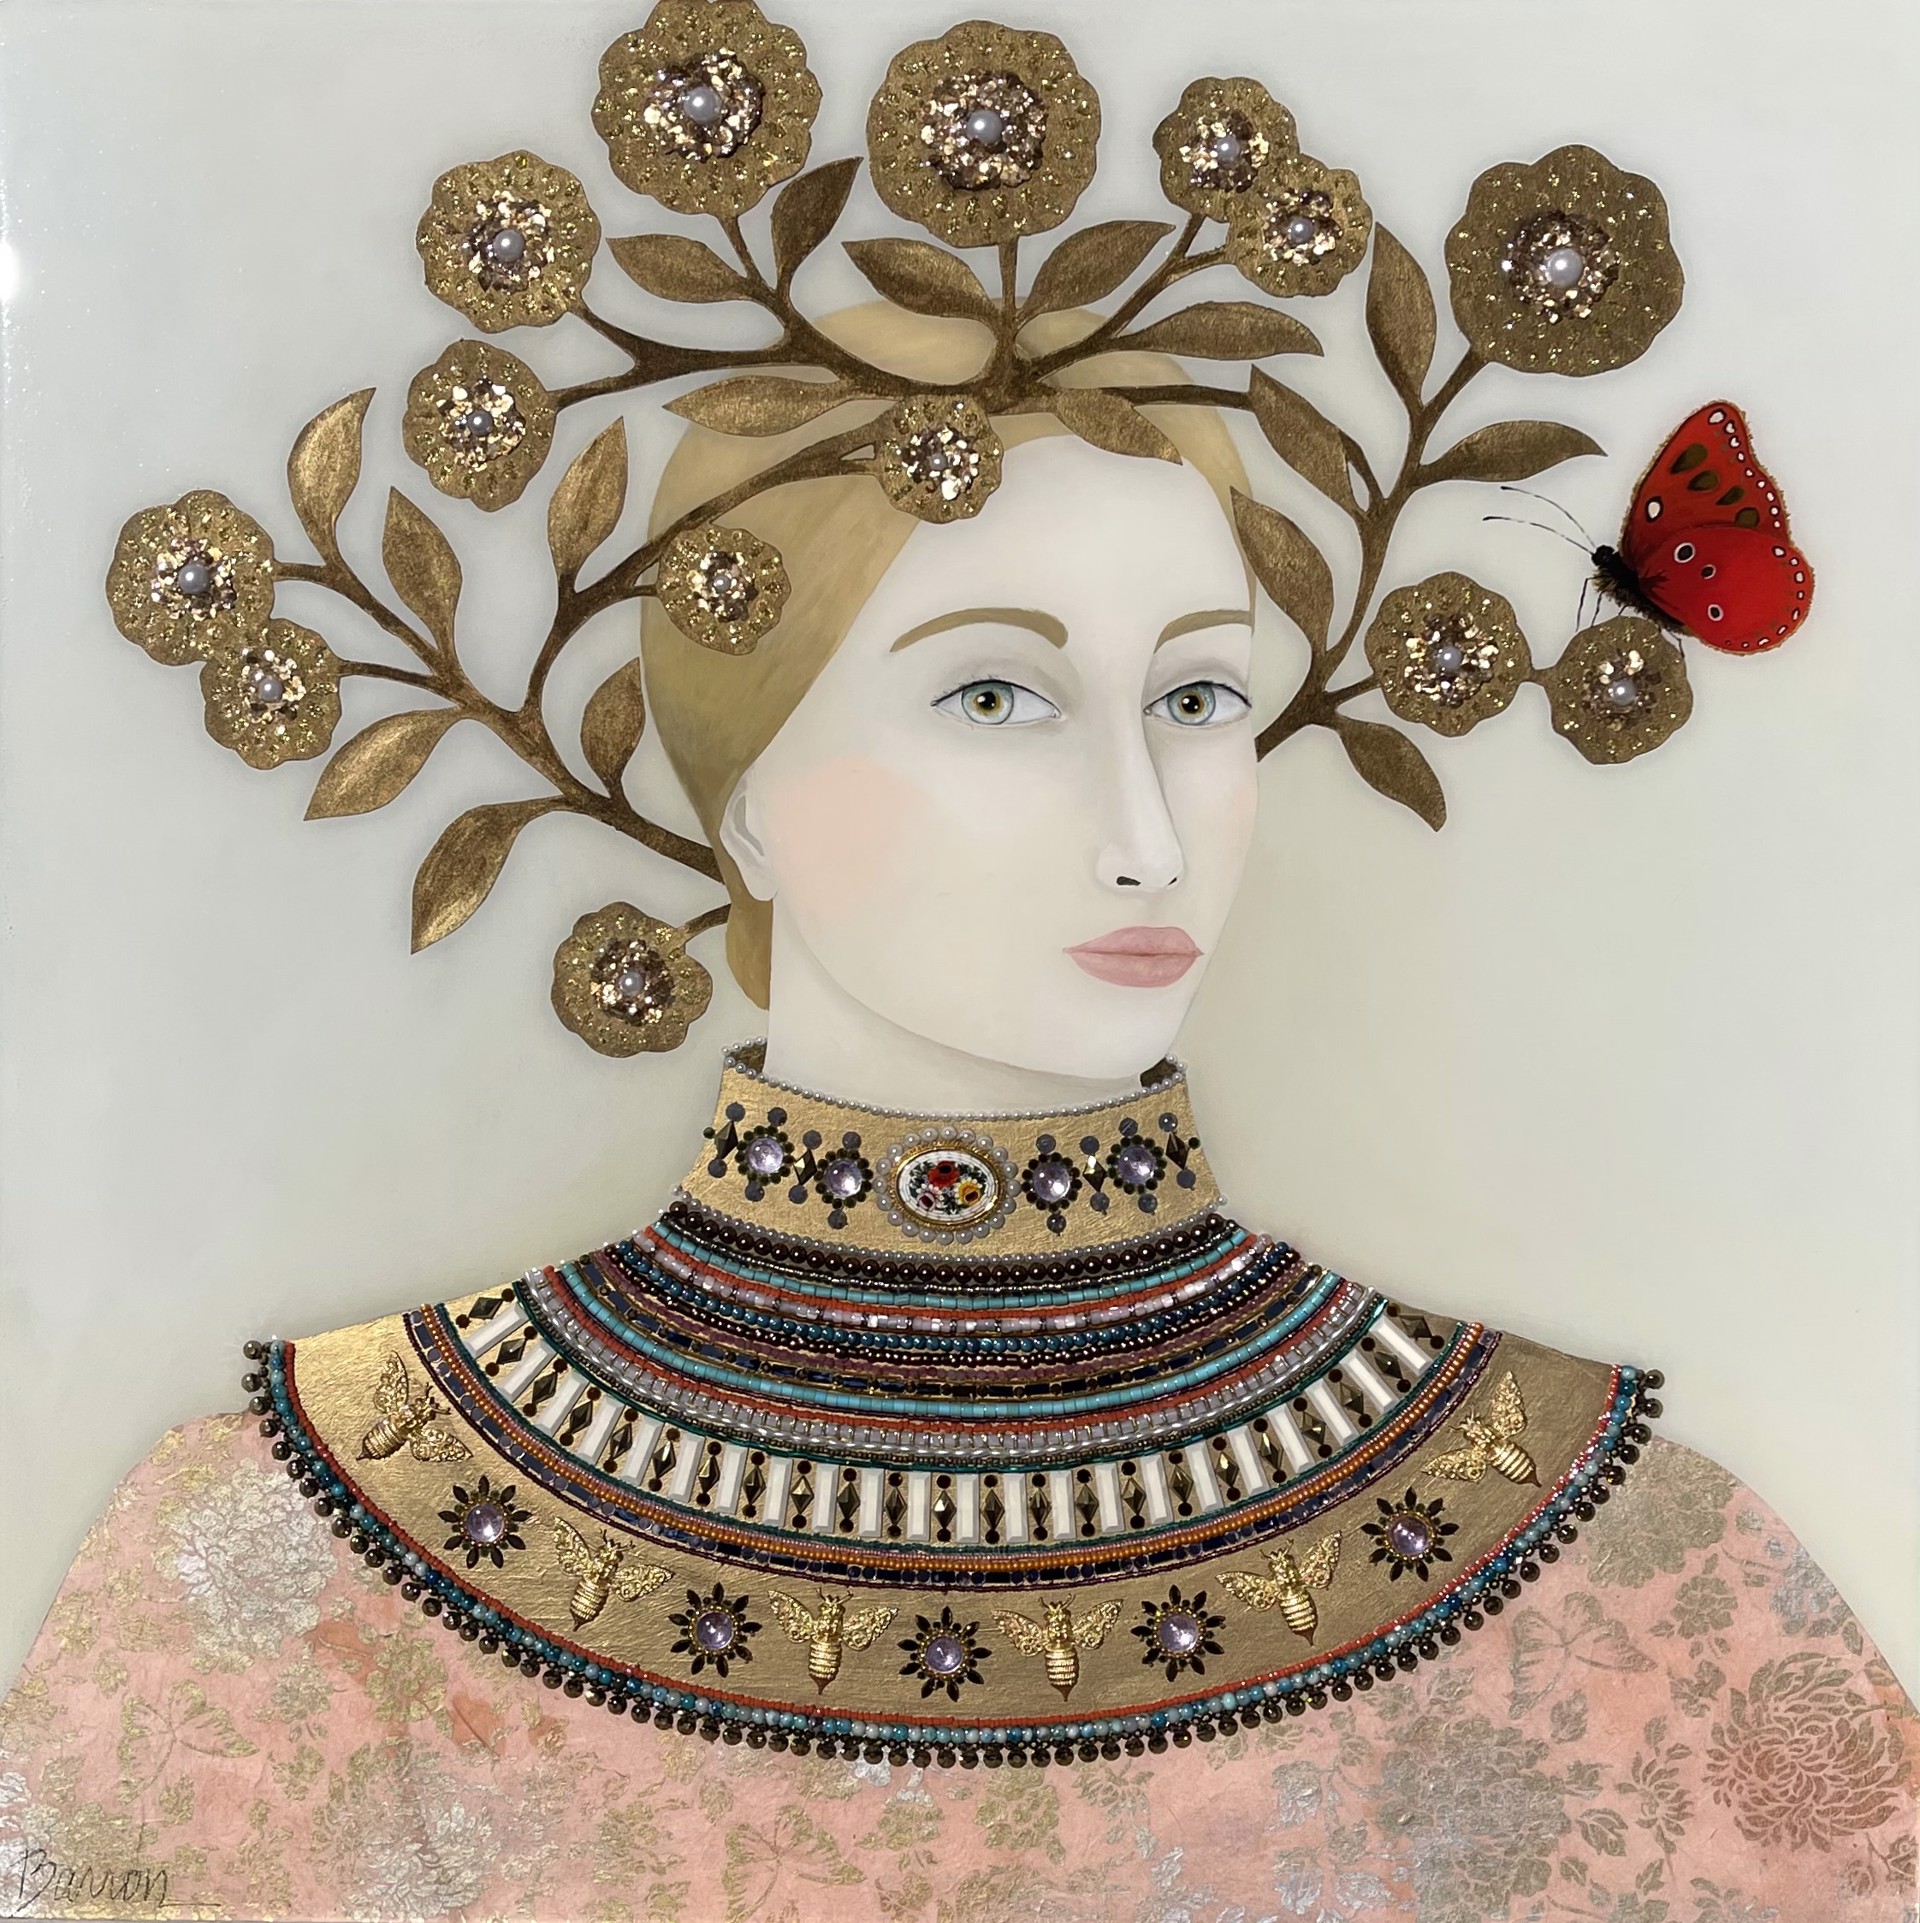 Woman with Gold Headdress by Leslie Barron